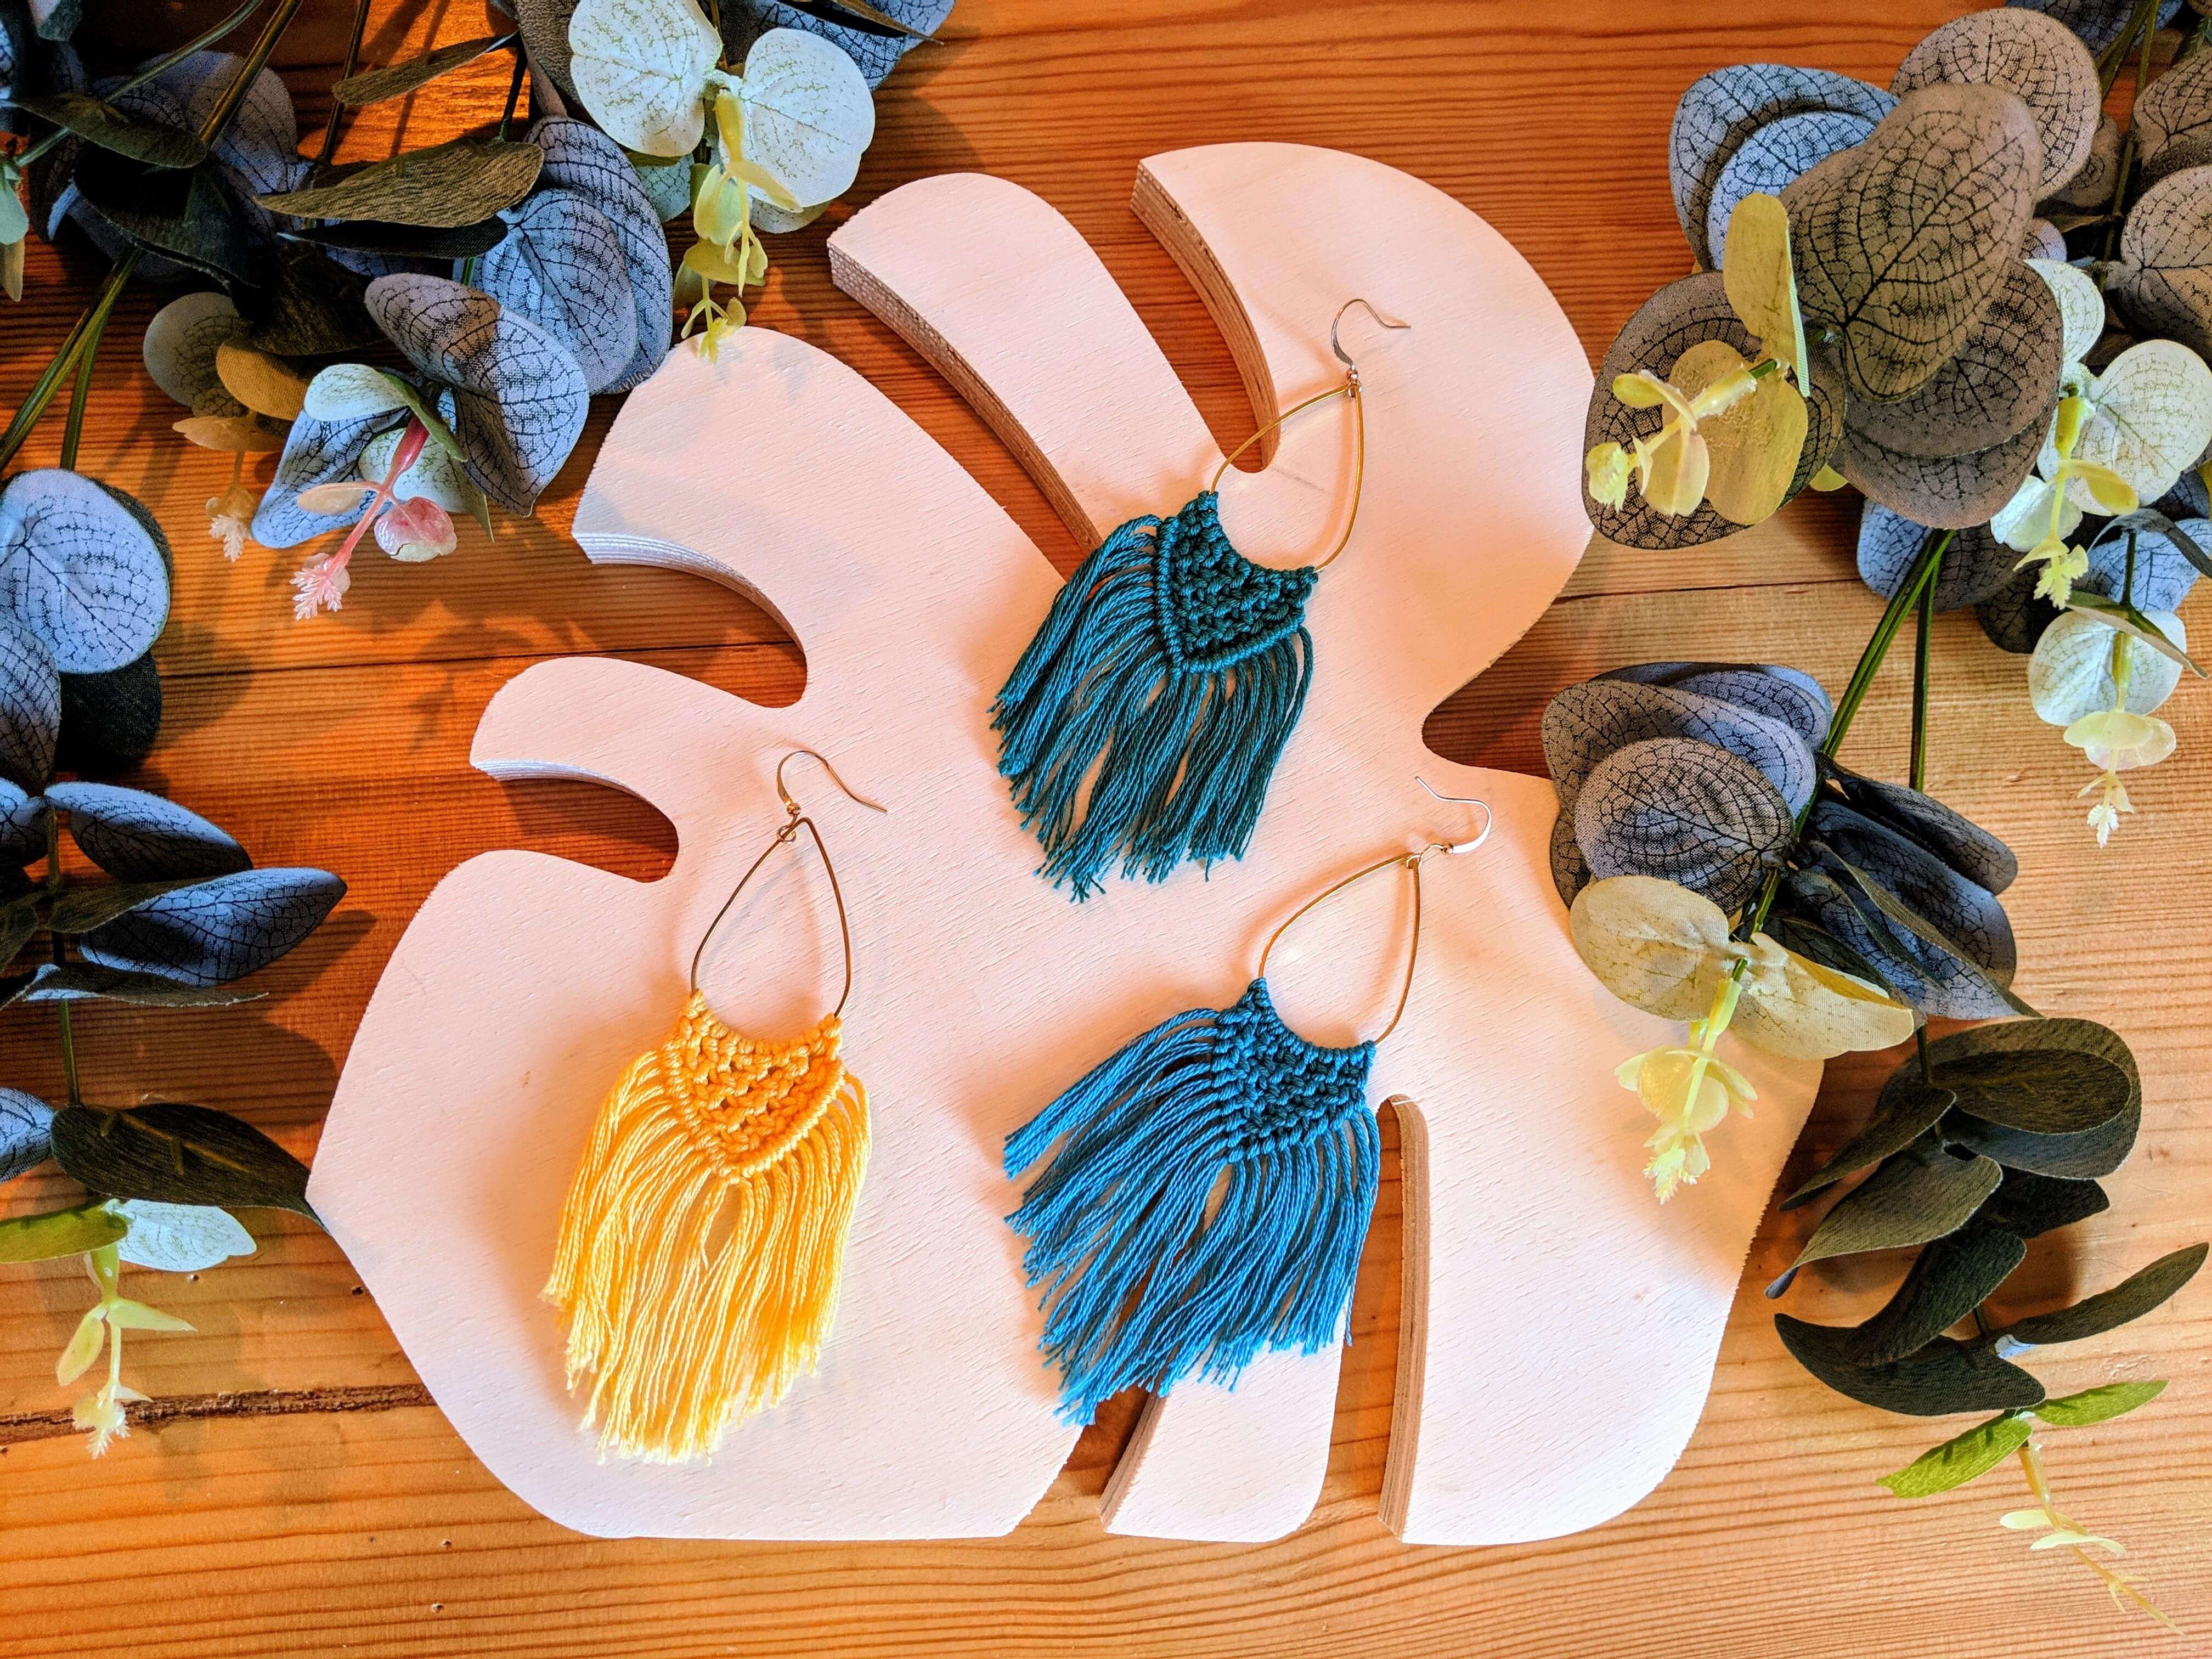 Macramé Earring Workshop with That’s What She Thread